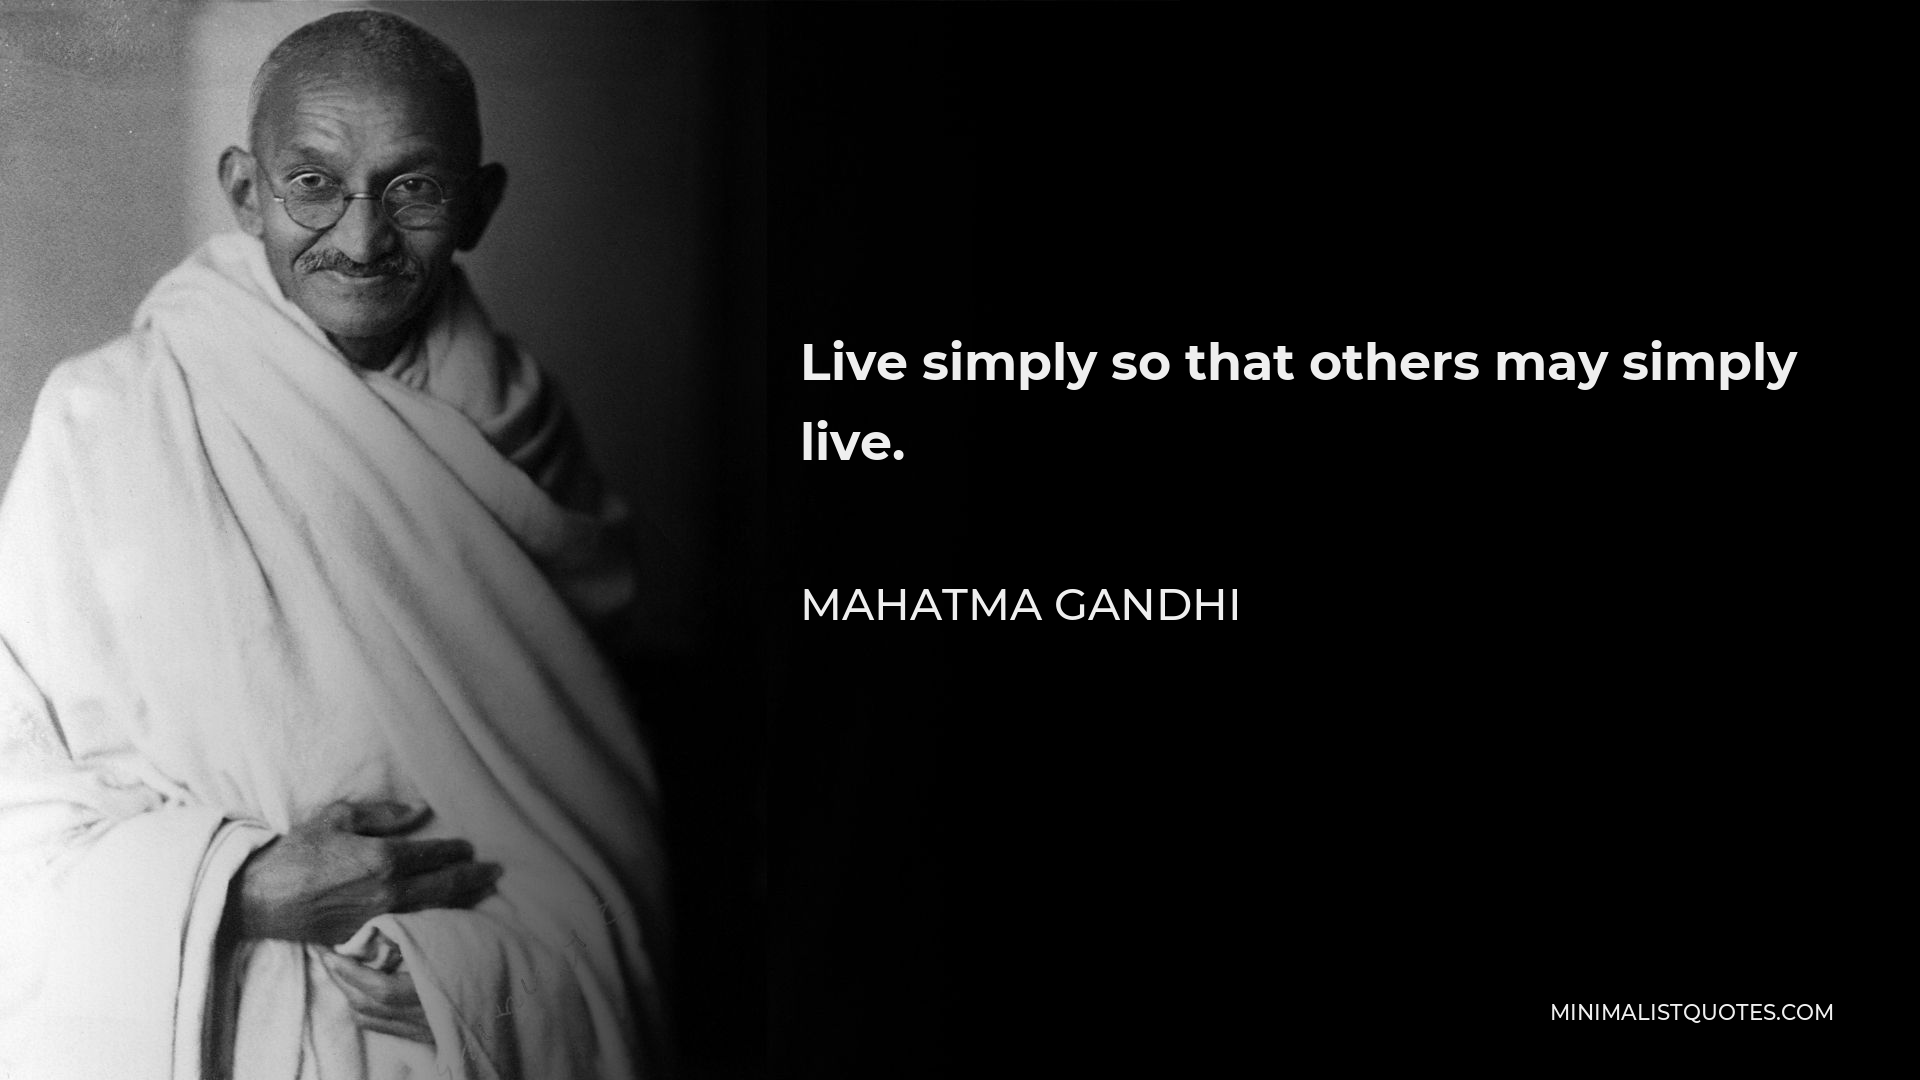 Mahatma Gandhi Quote - Live simply so that others may simply live.